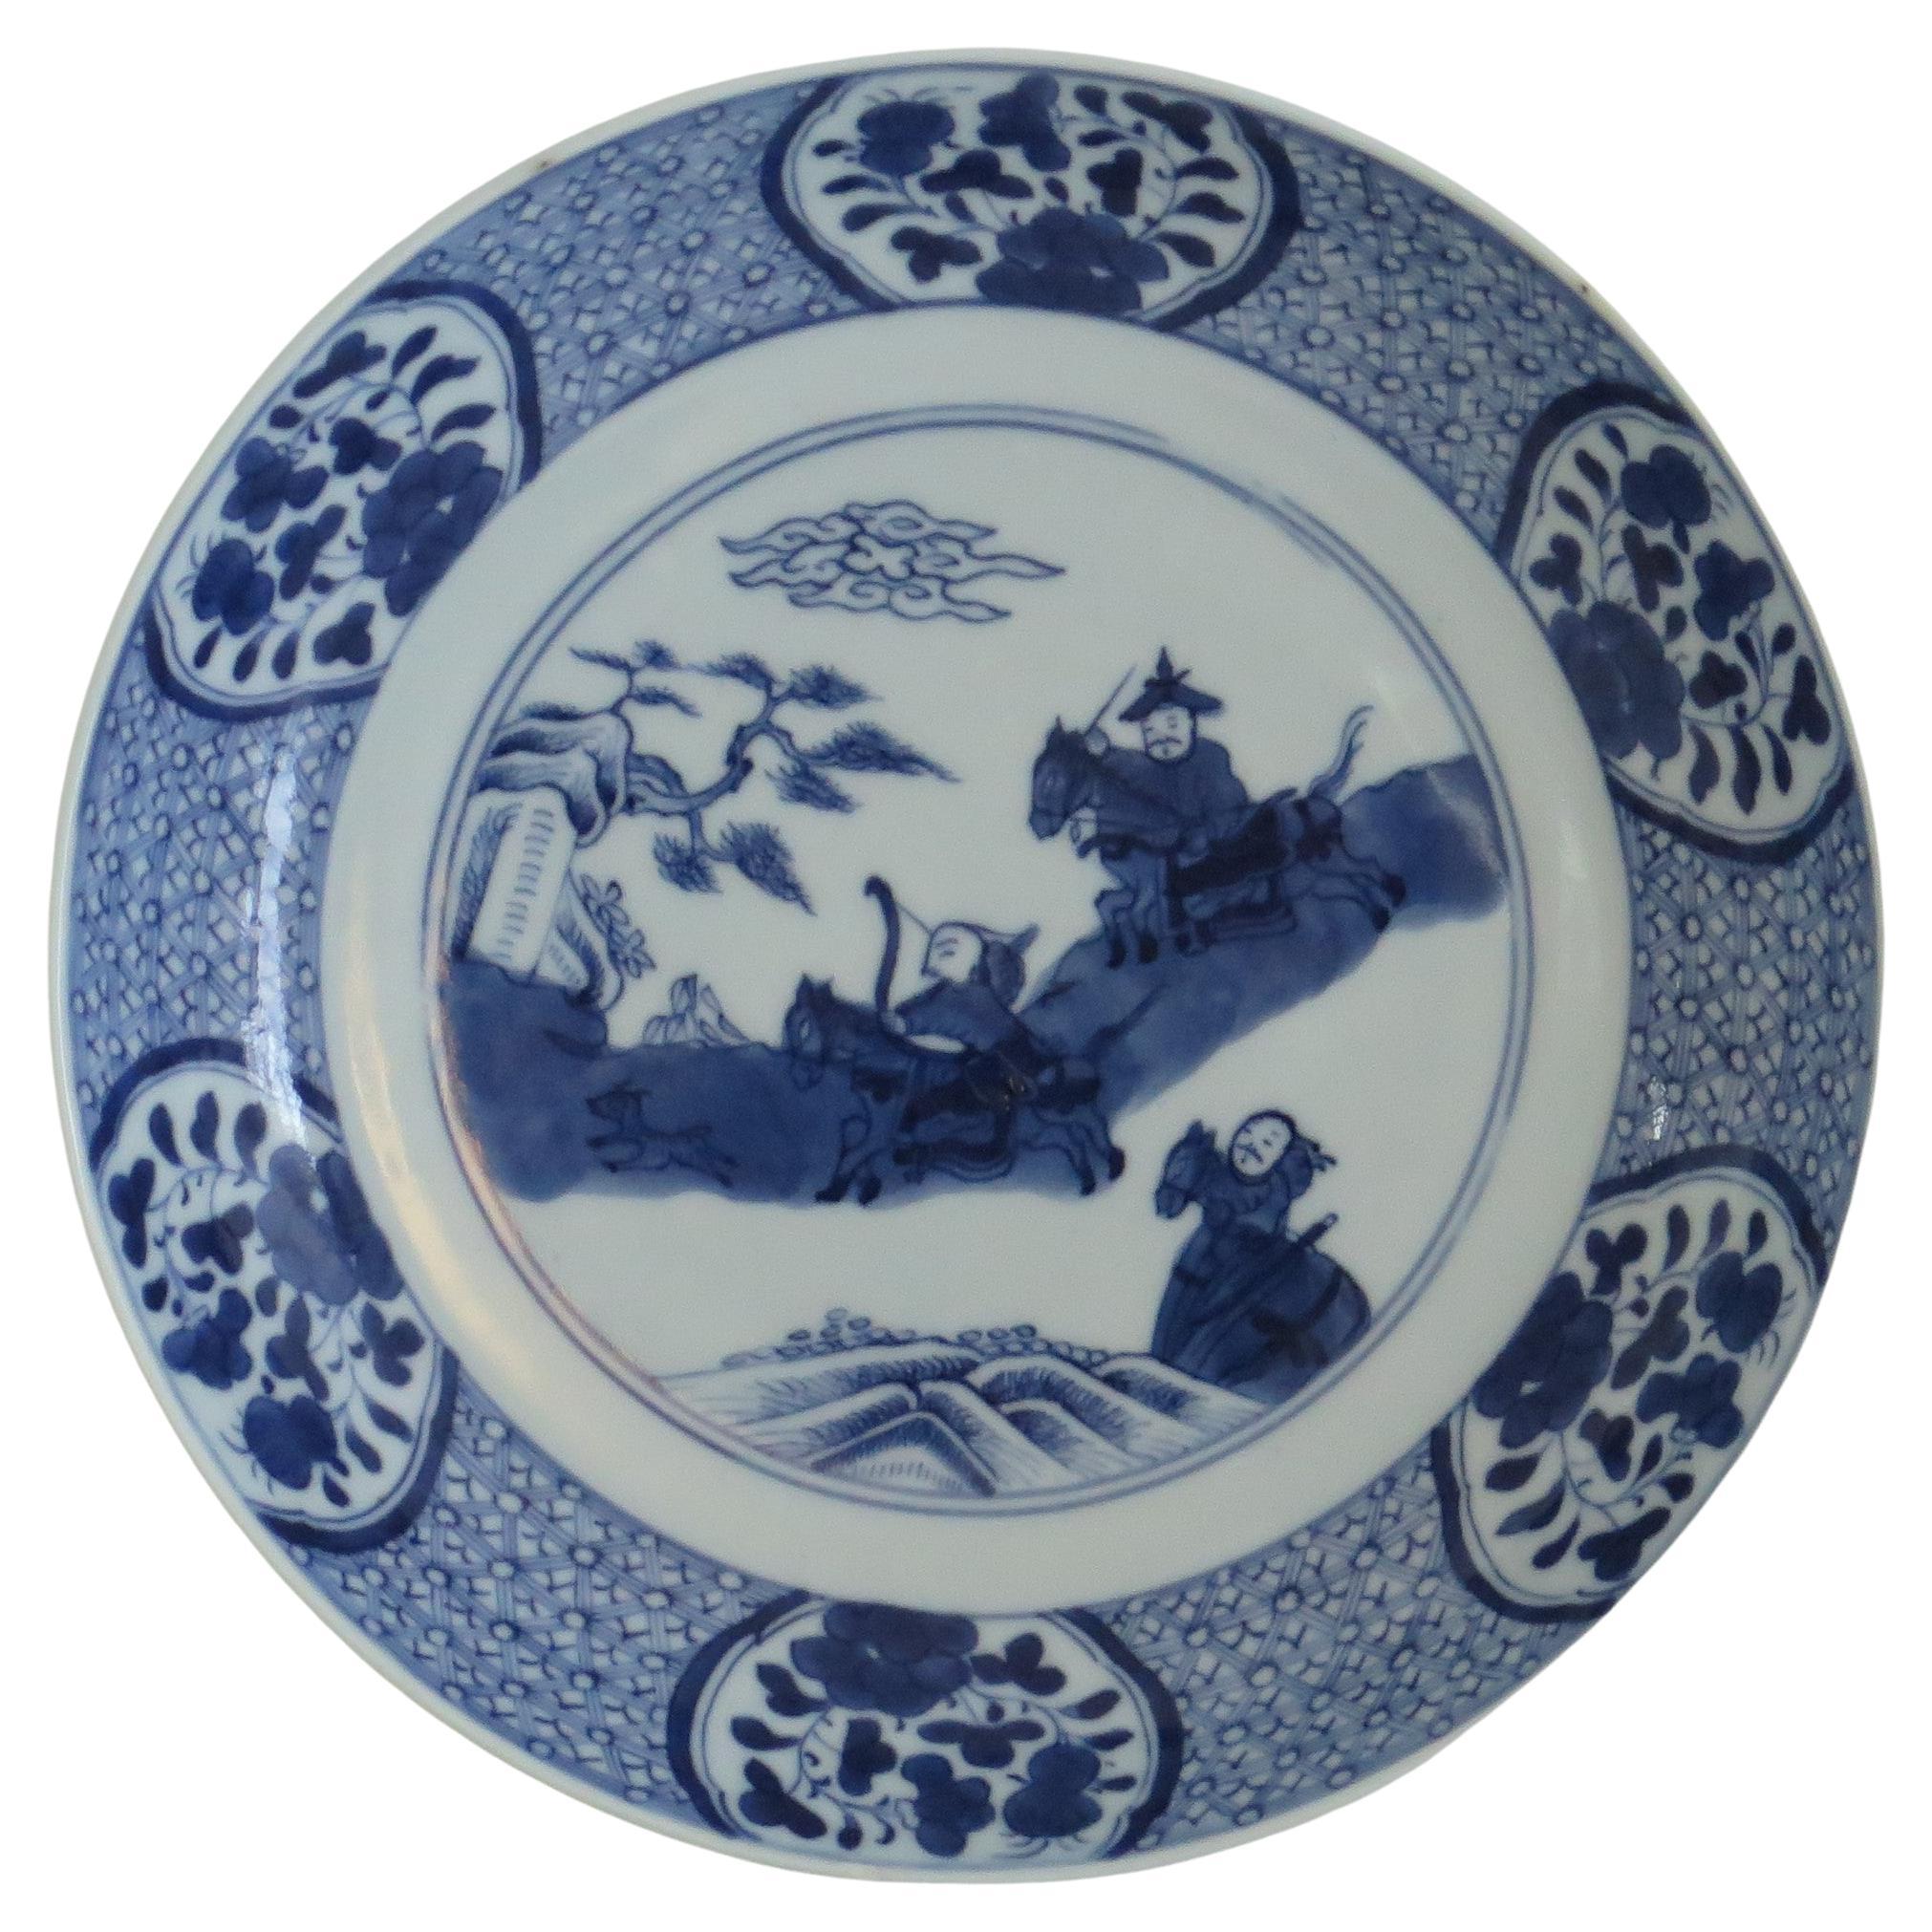 This is a very beautifully hand painted Chinese porcelain blue and white Dish or Plate from the 18th Century Qing Dynasty, possibly back to the Kangxi period ( 1662-1722). 

This is a well potted dish with a very neatly cut foot rim and a white